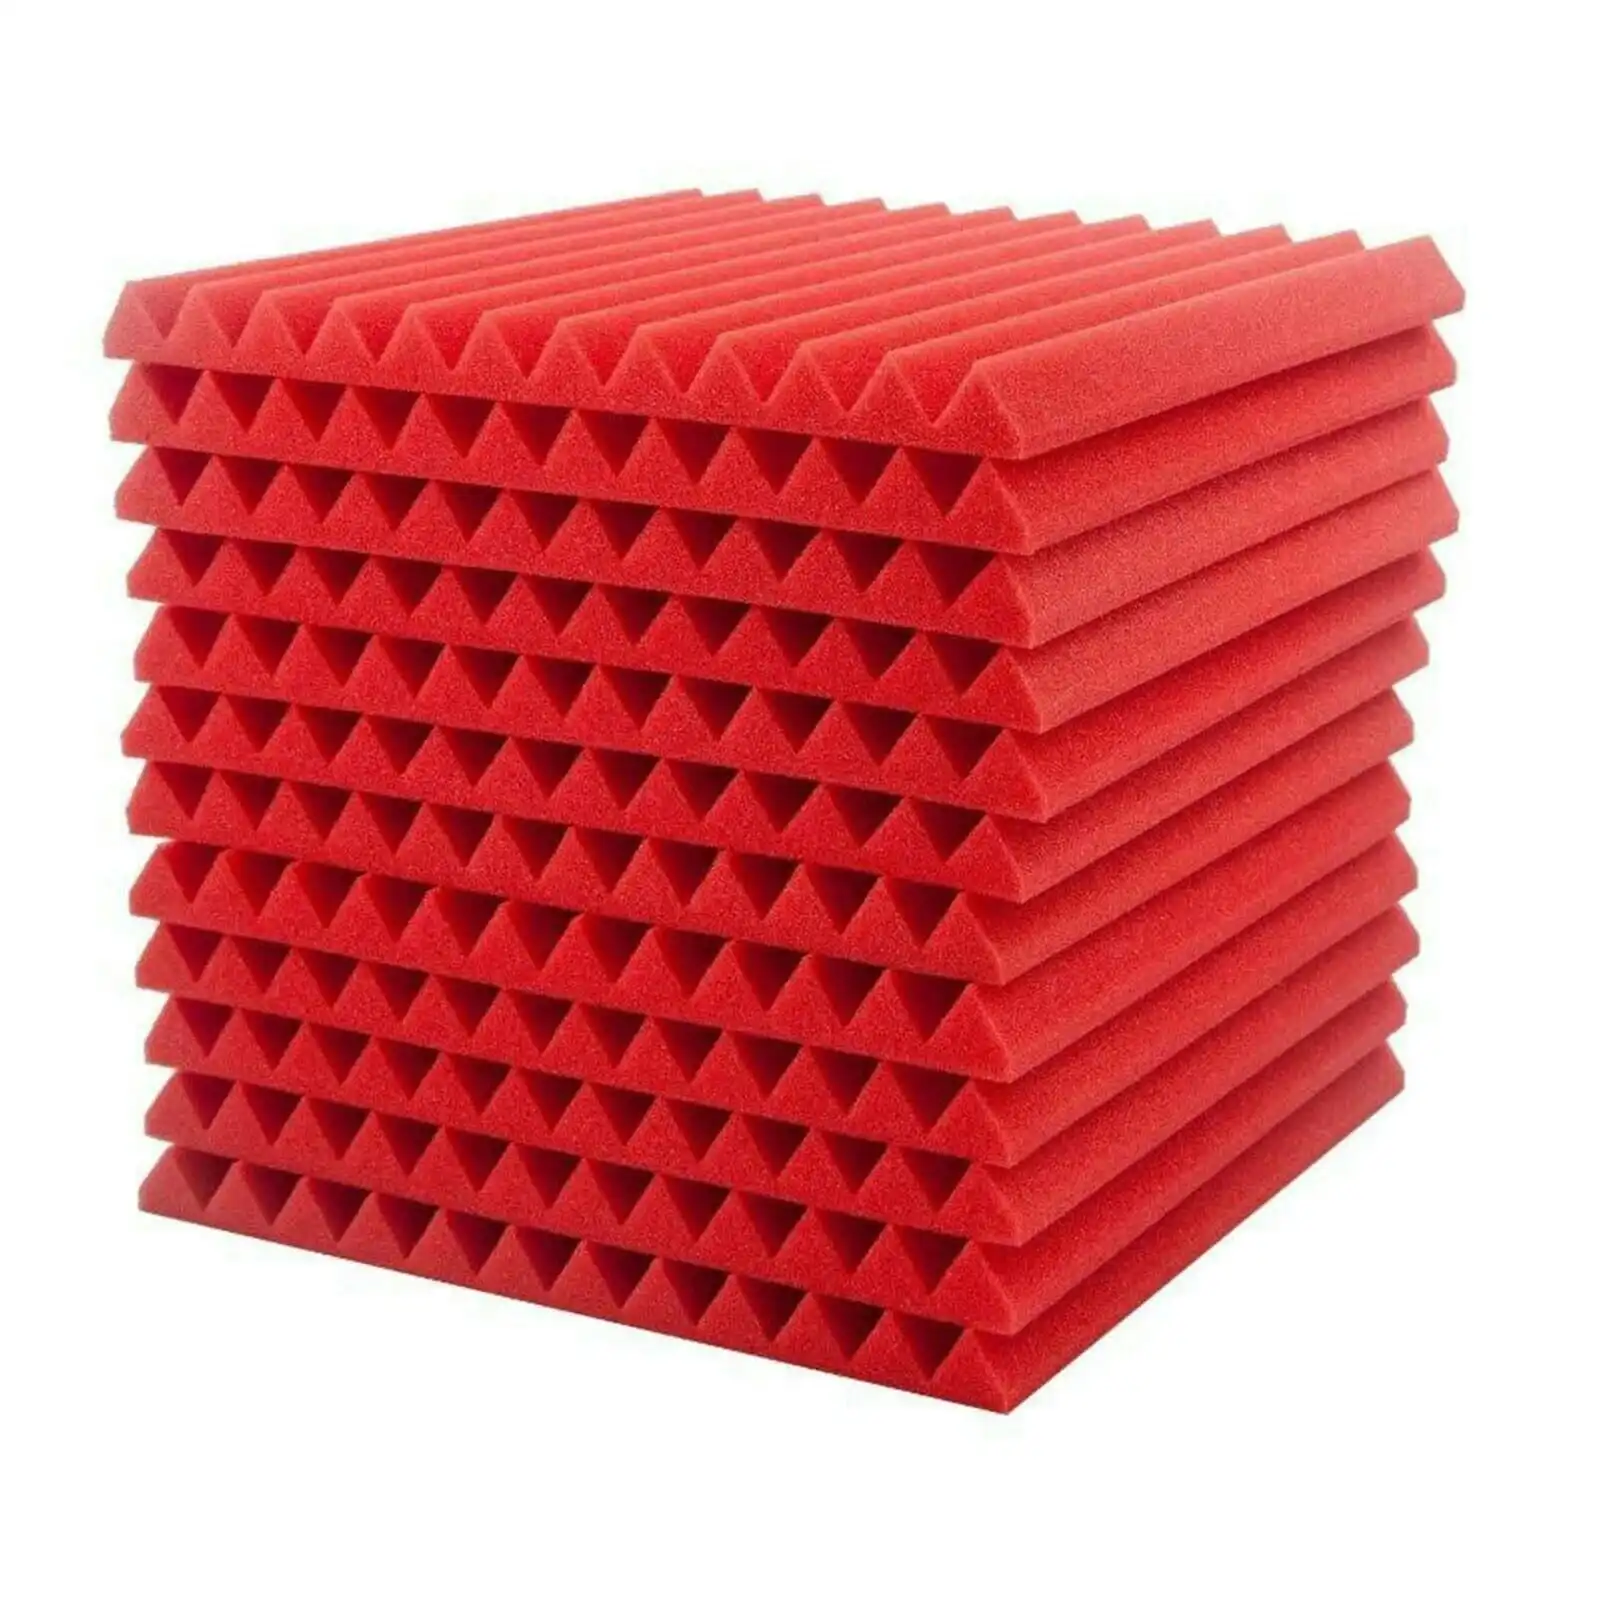 24 Acoustic Soundproof Foam Sound Absorbing Panels 30x30x2.5cm | Red